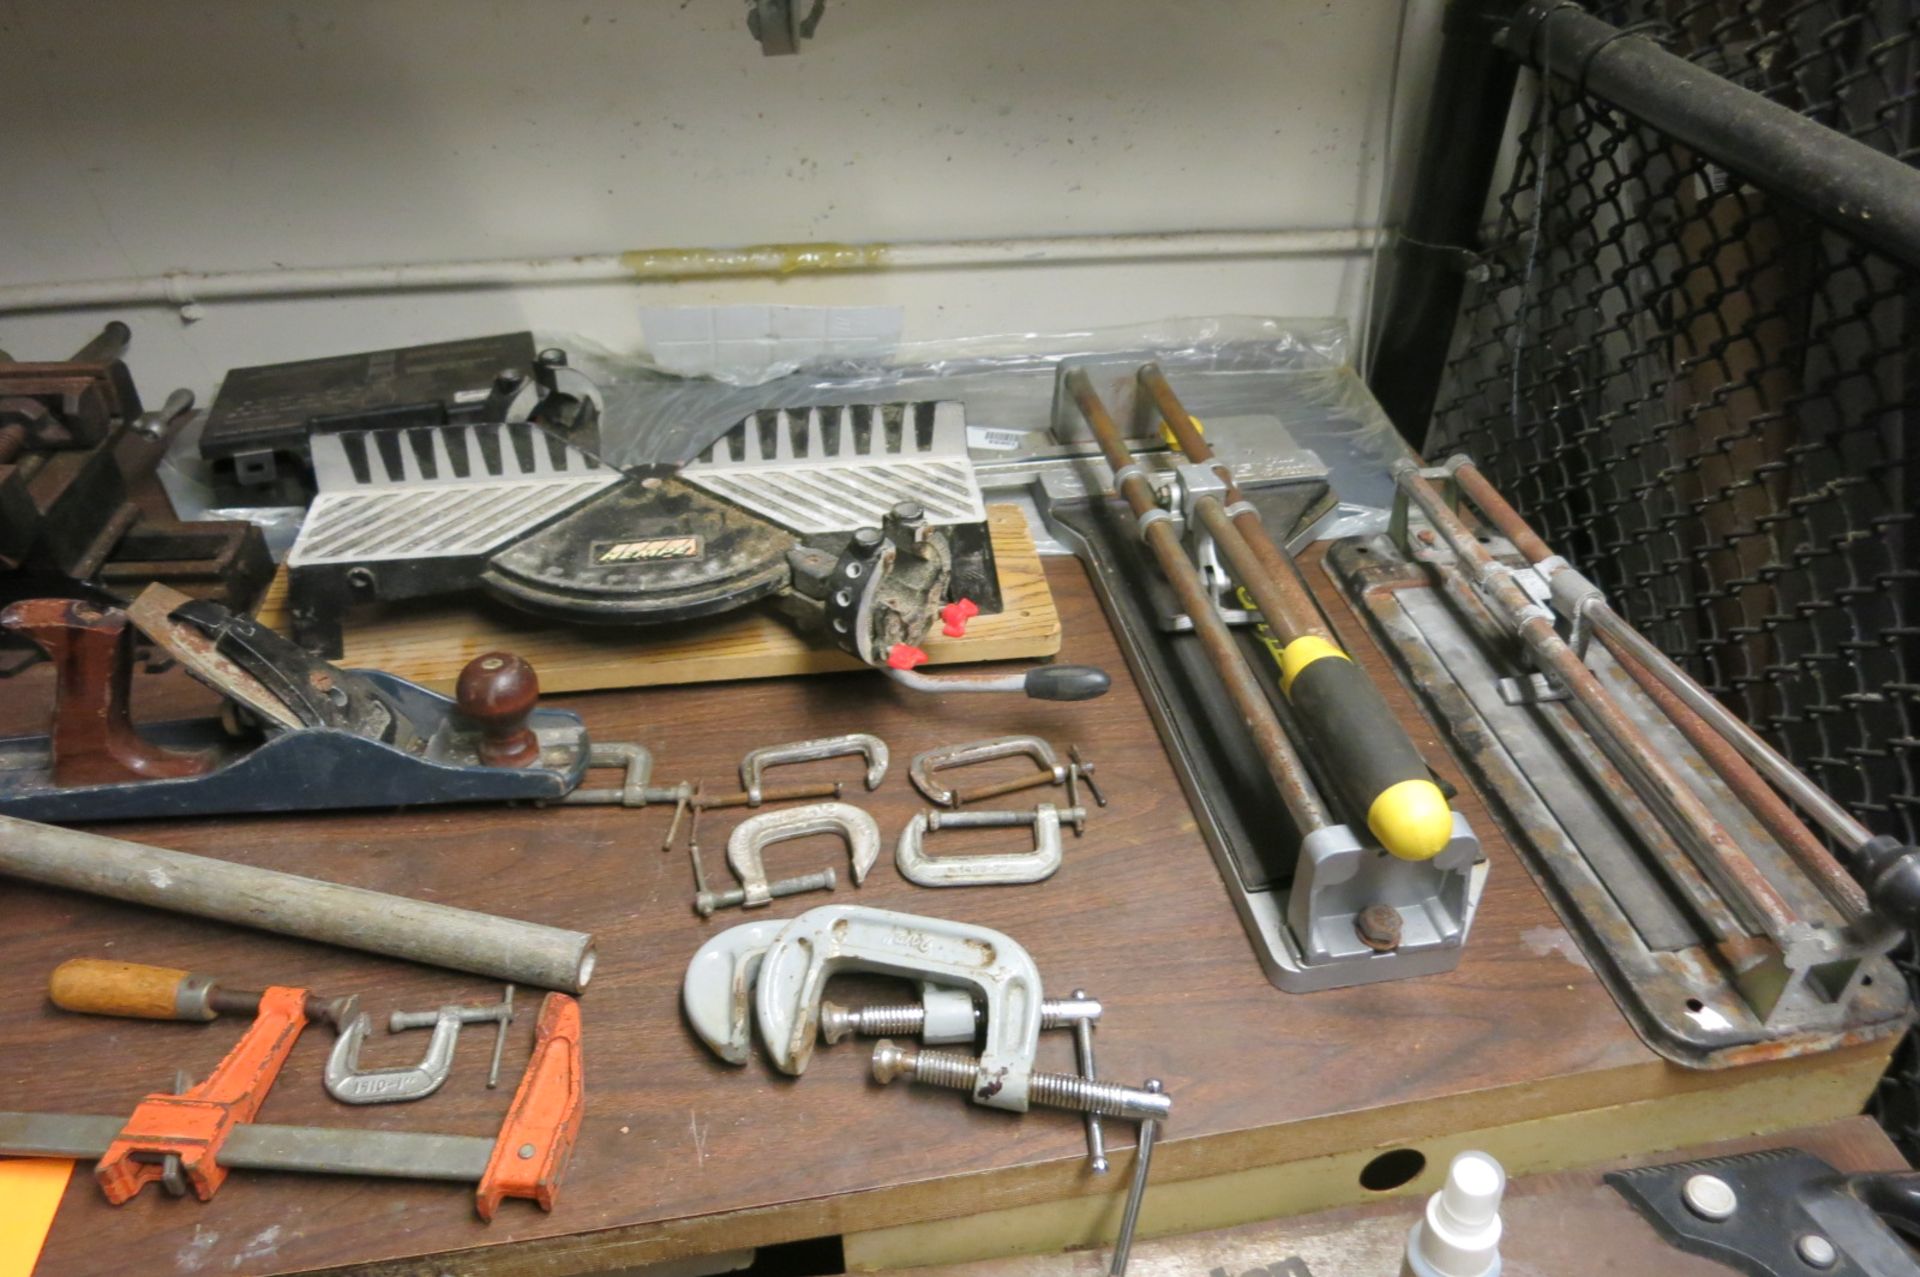 Tools - Image 3 of 4